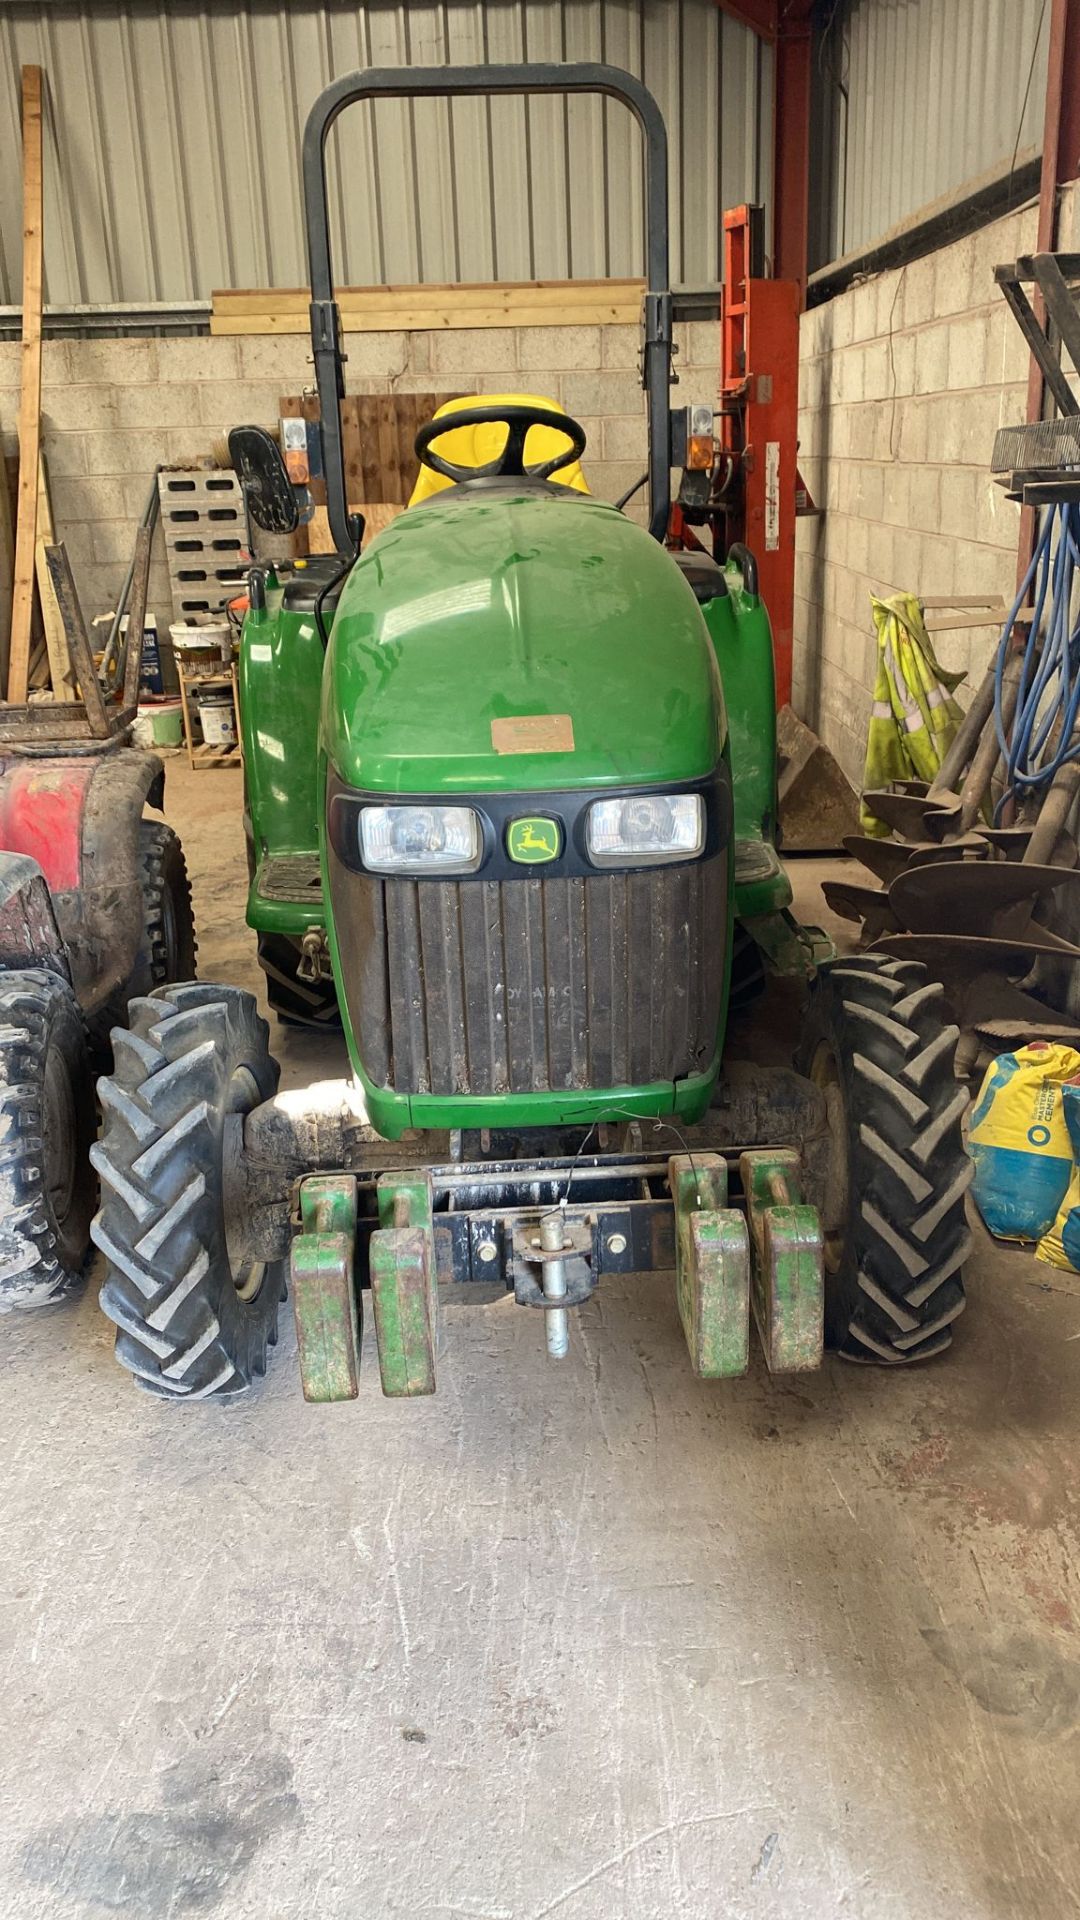 2007 John Deere 3720 Compact Tractor, 959 Hours (Located Wem. Please Refer to General Notes) - Image 4 of 5